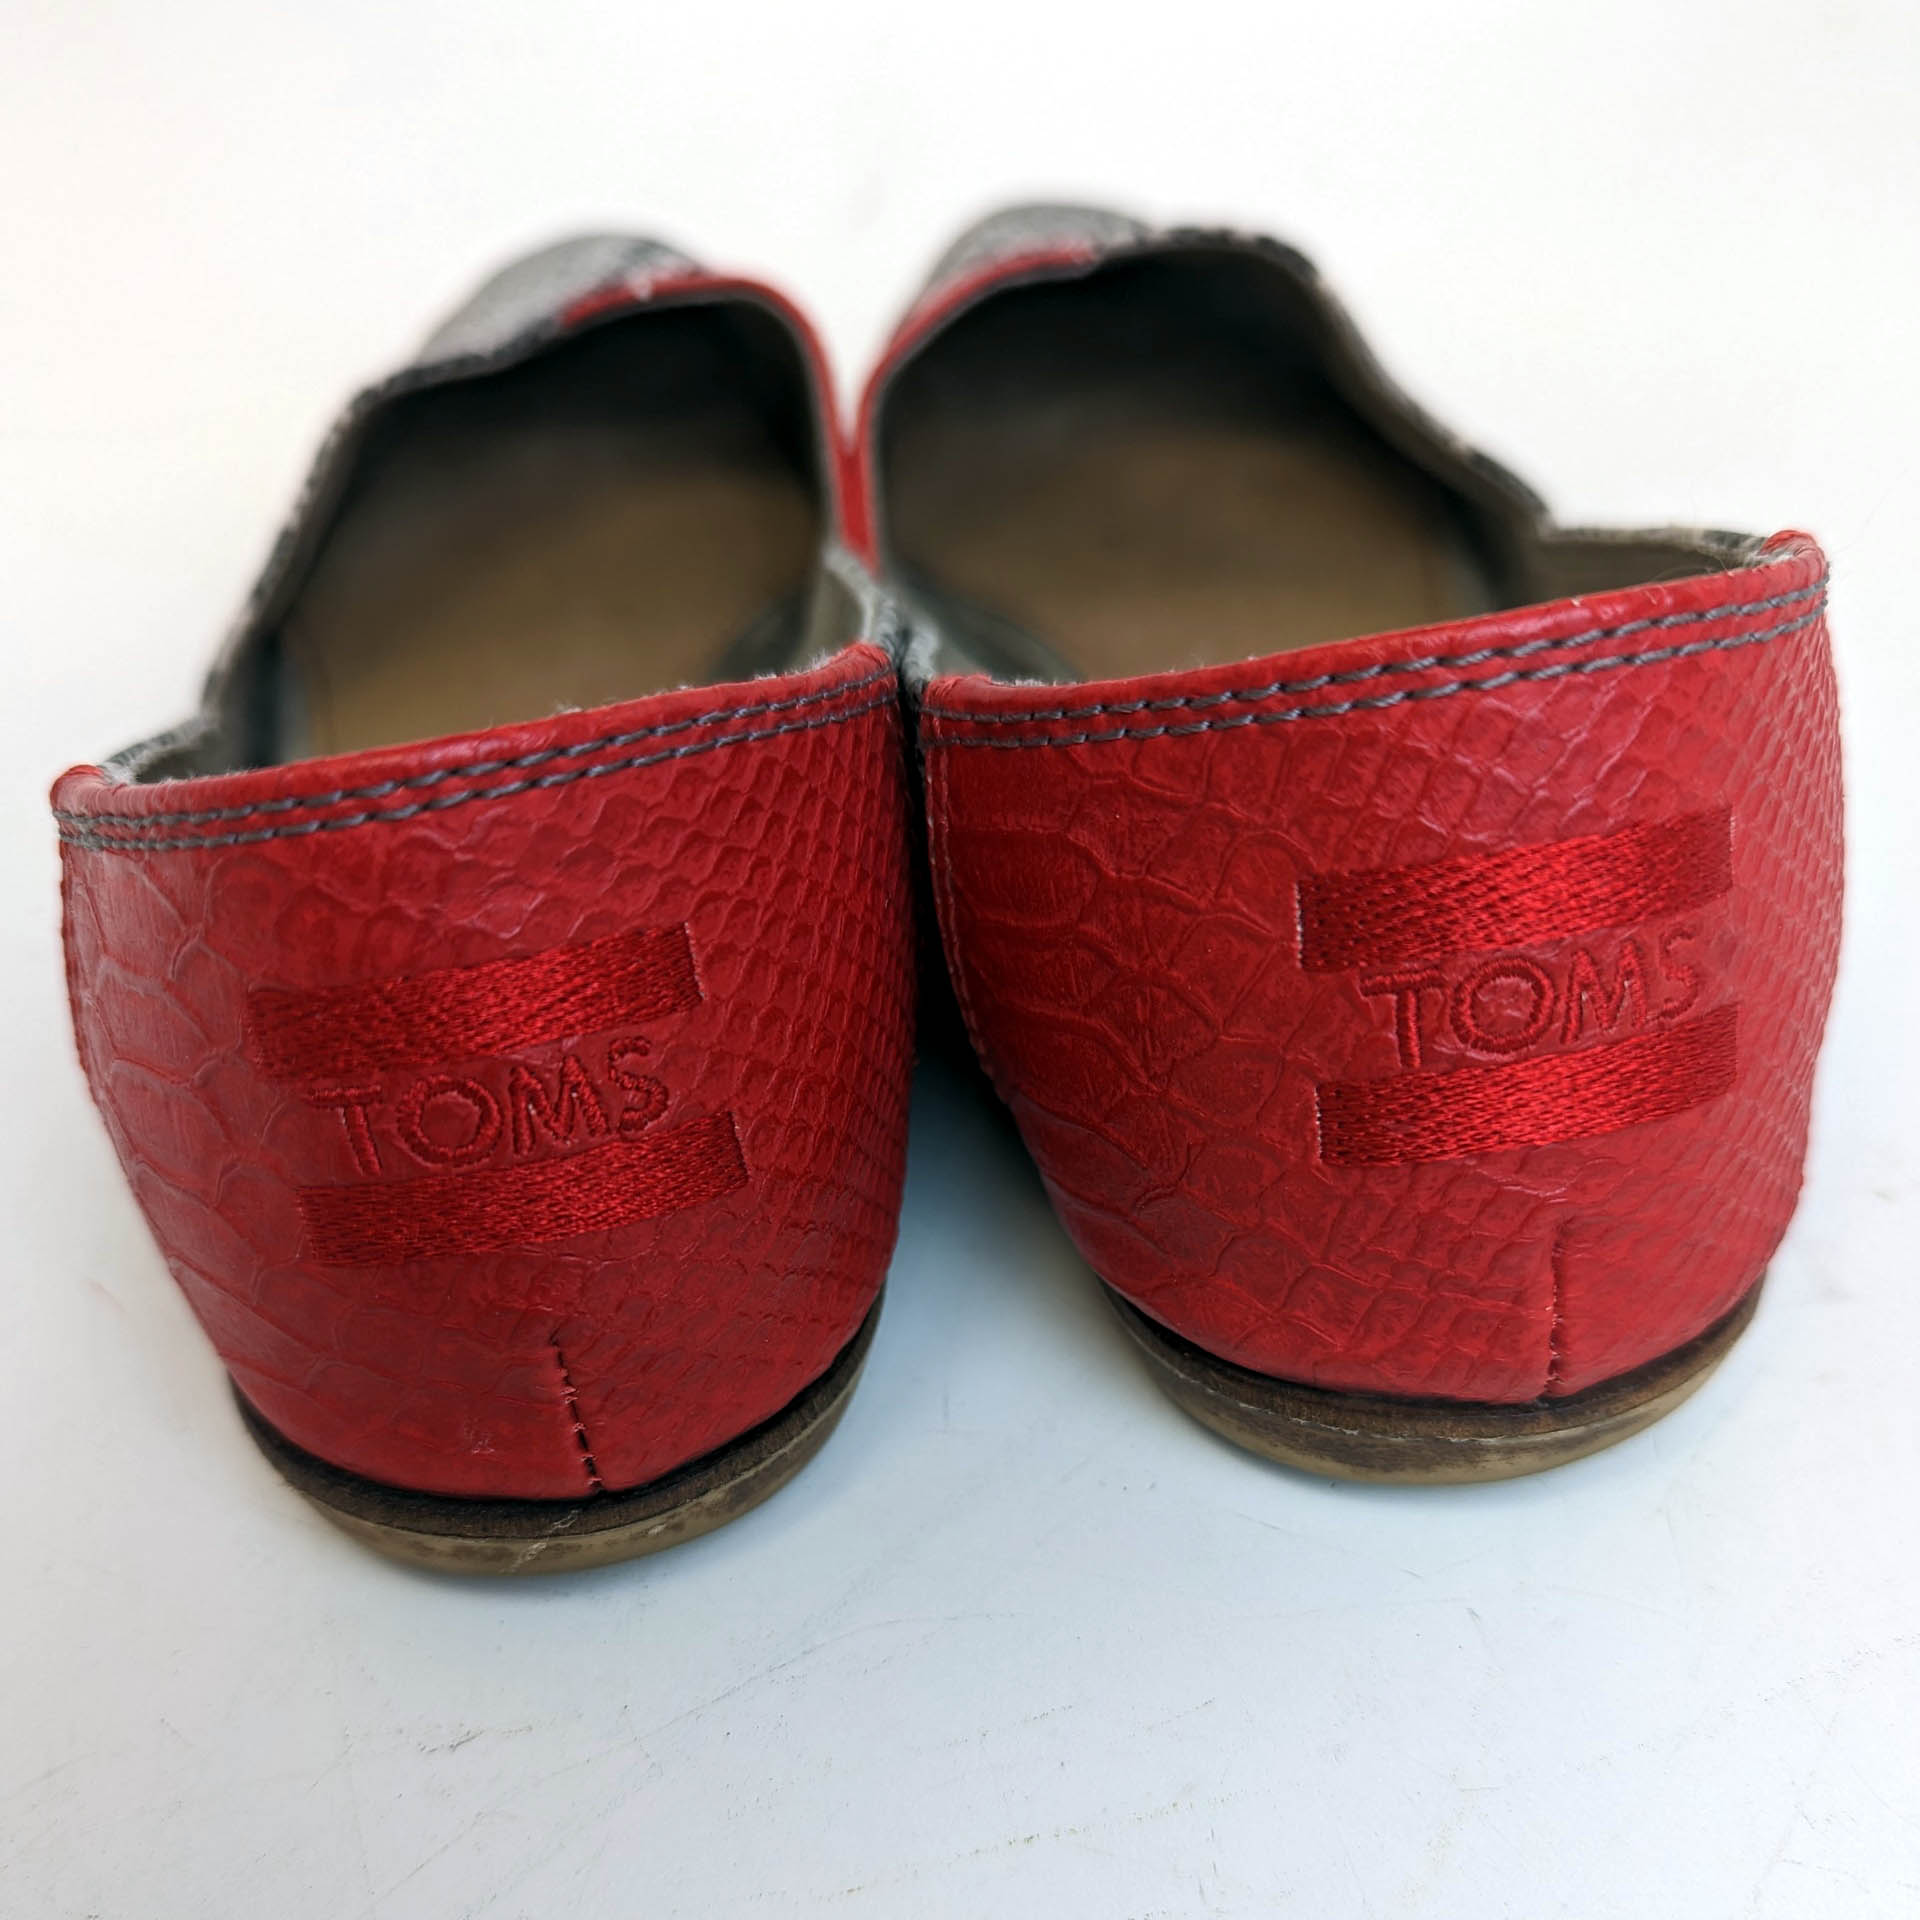 Toms Womens Jutti Ballet Flat Shoes Red Snakeskin Pointed Toe Size 5.5